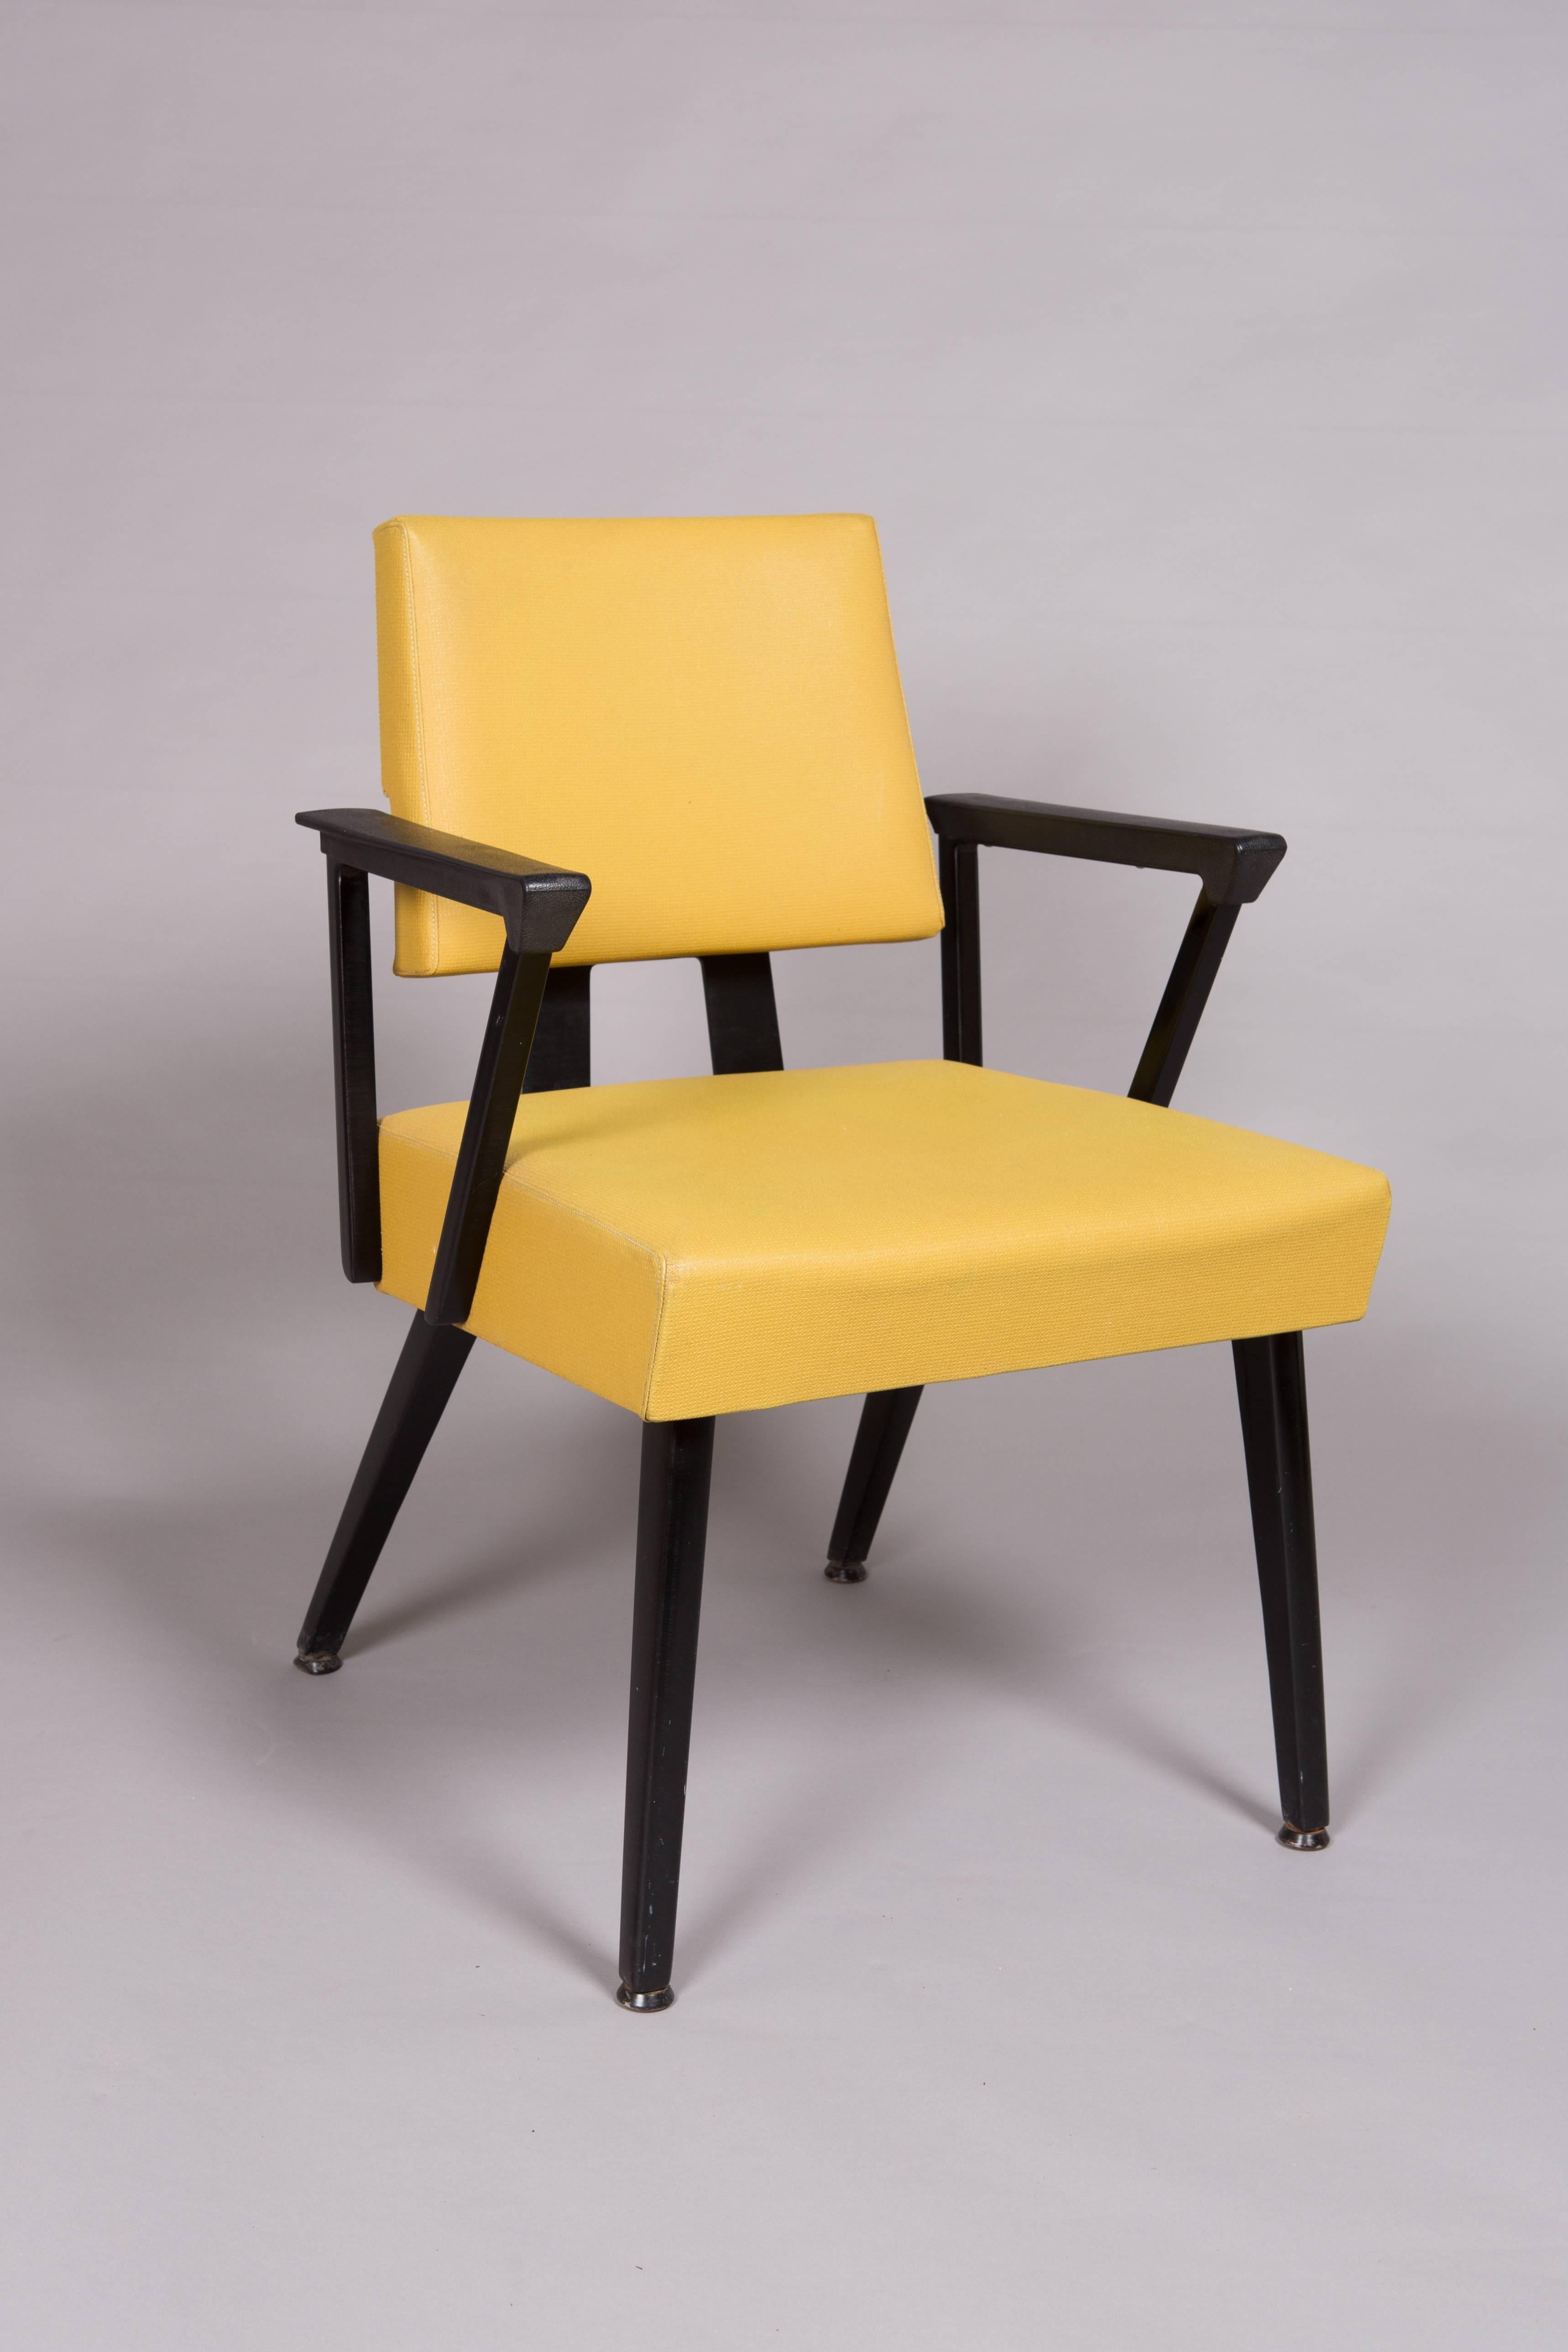 Completely original pair of yellow and black vinyl covered midcentury armchairs with metal frame and faux wood grain detail to arm rests. Very sturdy and comfortable chairs. Great condition considering their age!
Measures: 24.75